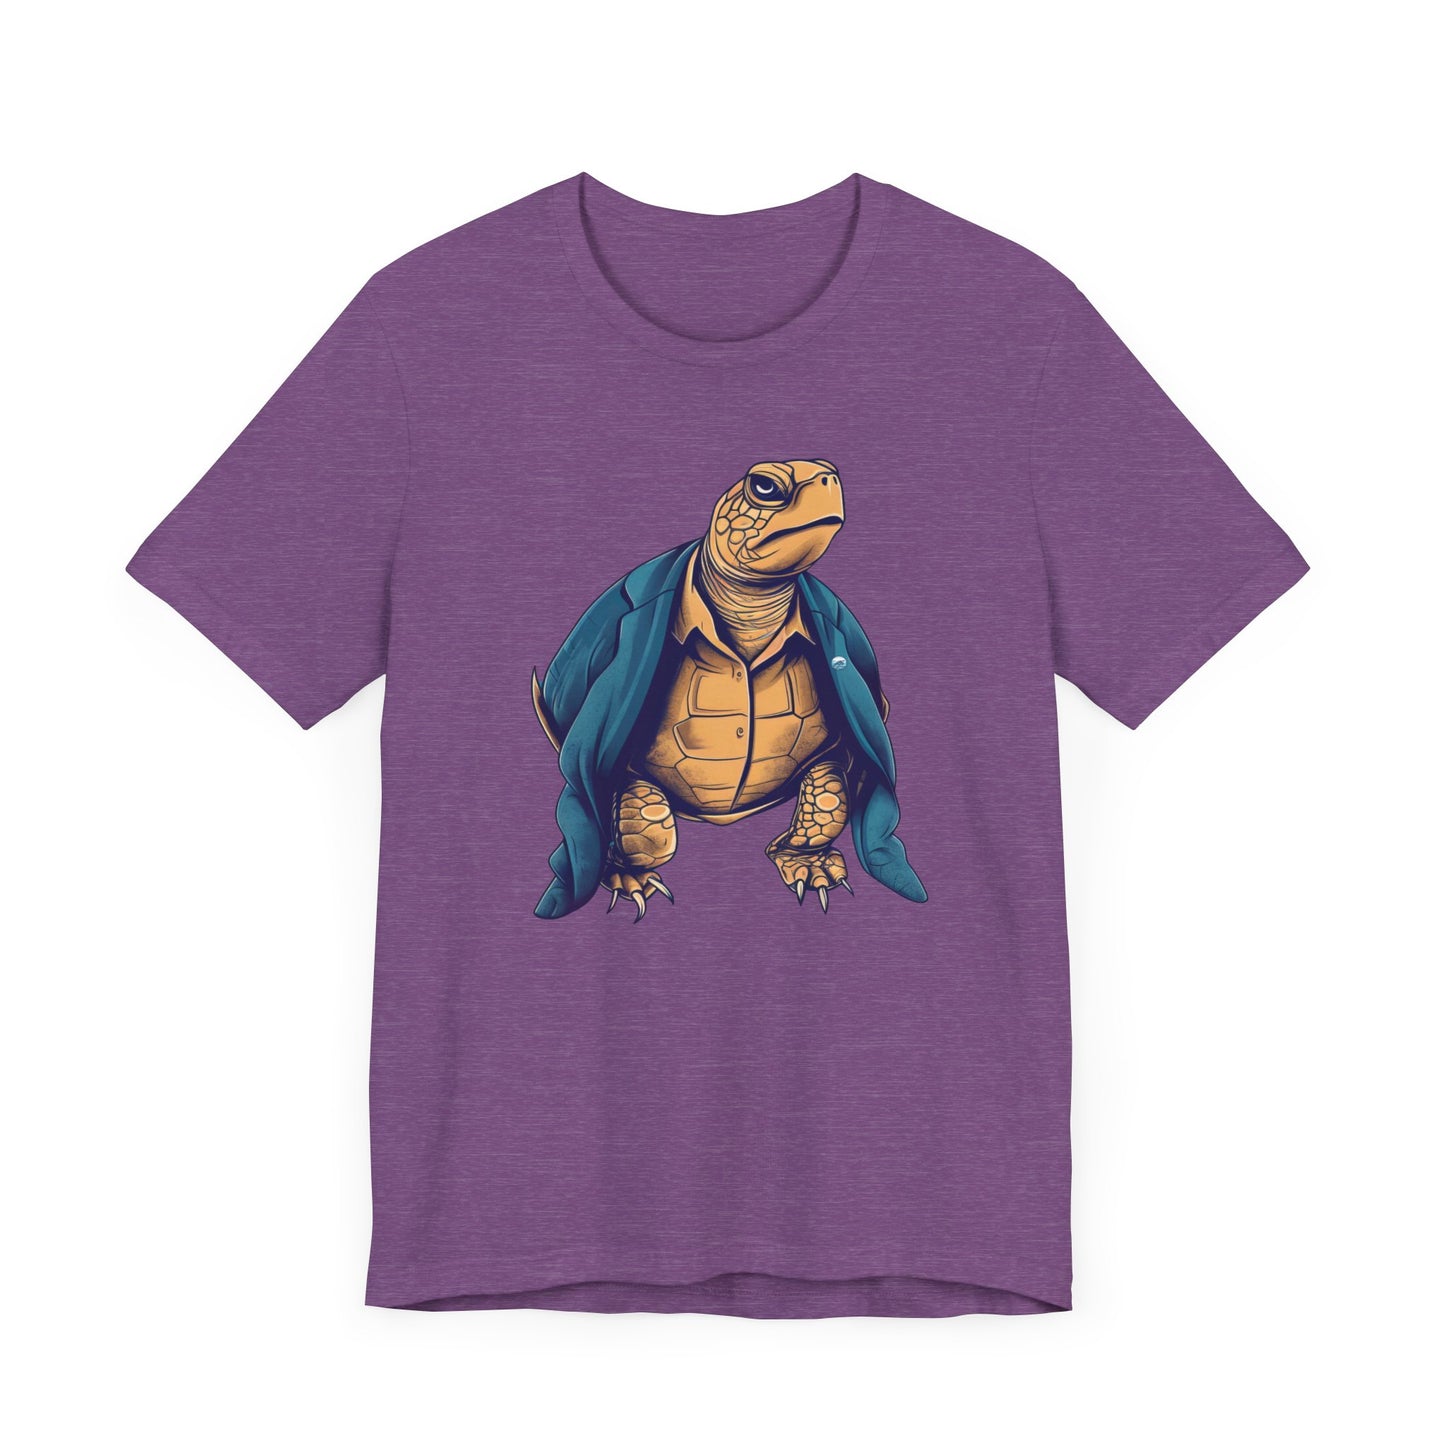 Paco Turtle Graphic Tee - Unisex Eco-Friendly Cotton Shirt by JD Cove